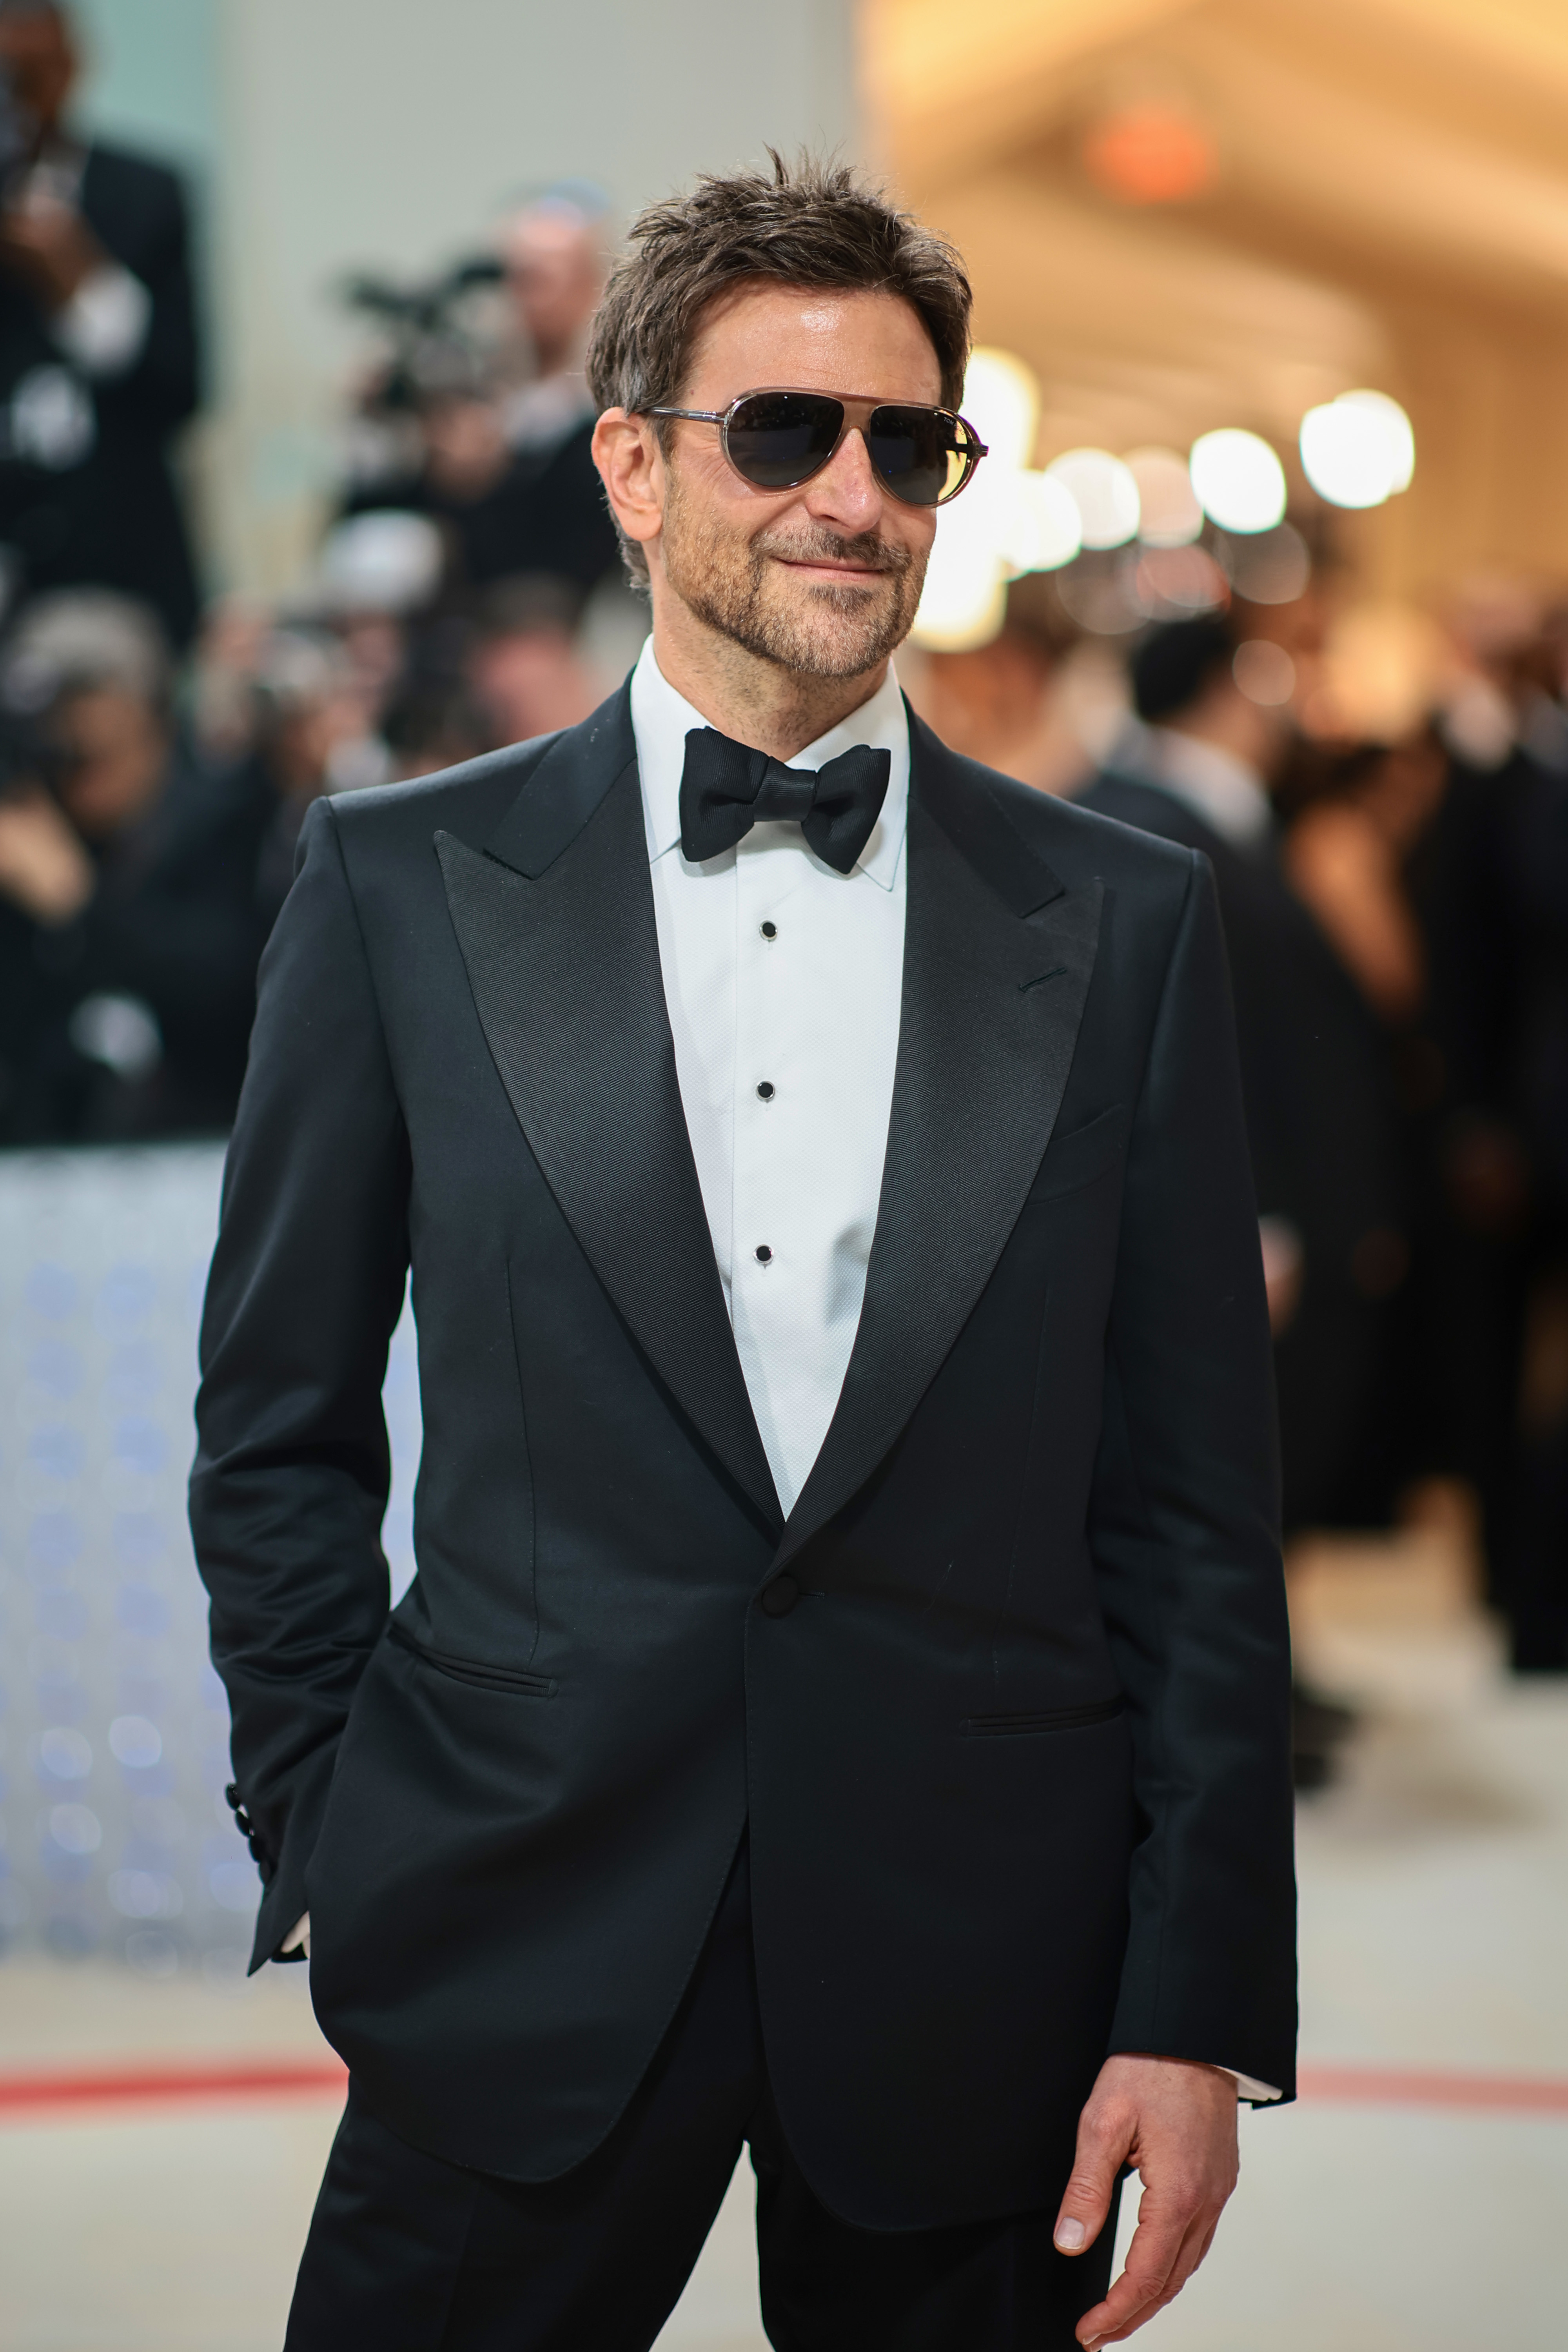 him wearing a suit and sunglasses at an event